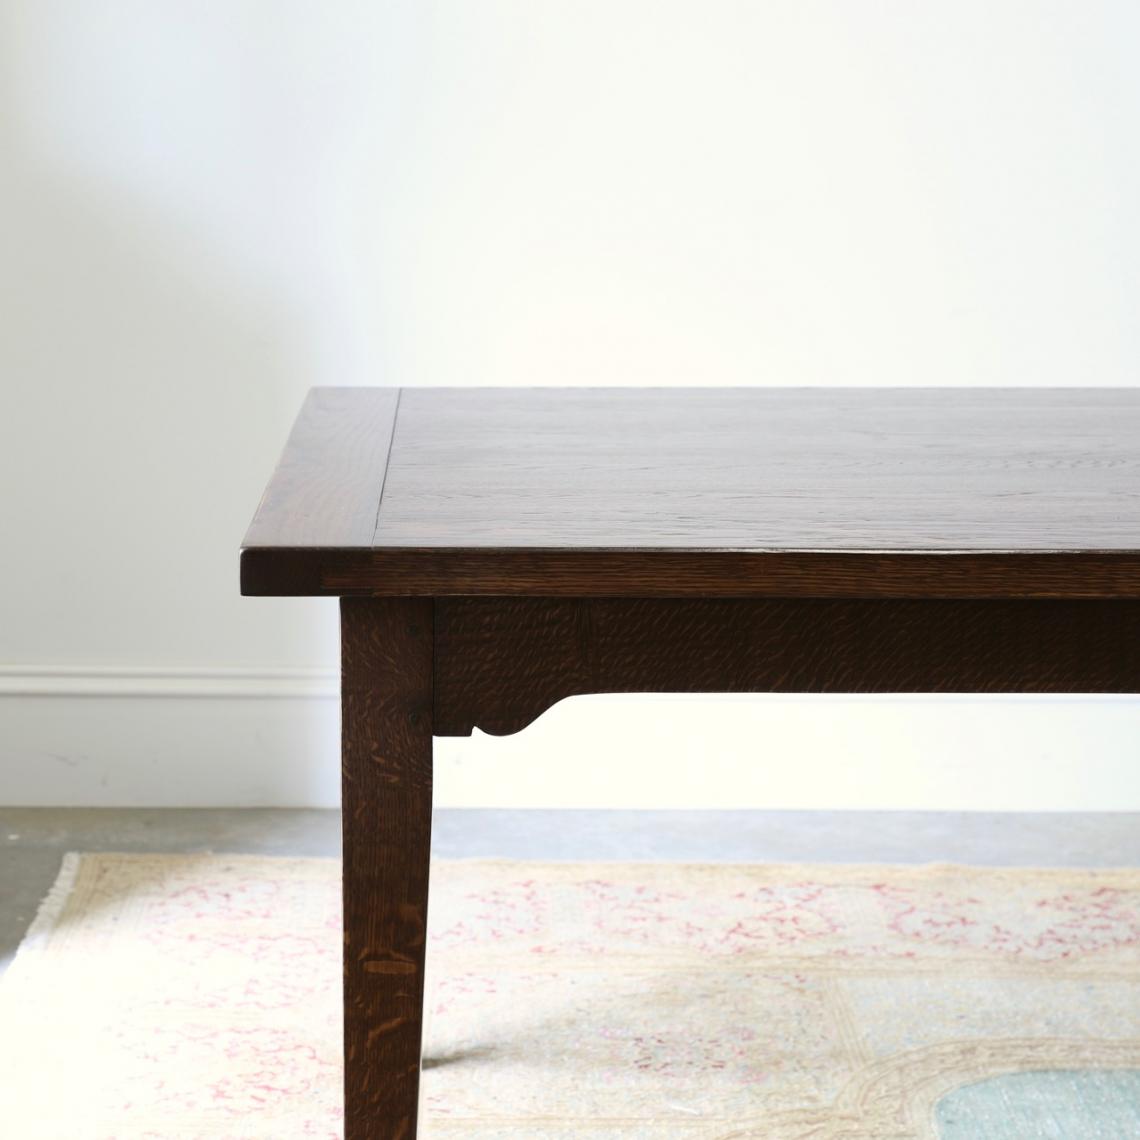 Tapered Leg Dining Table with Shaped Skirt // JS Editions